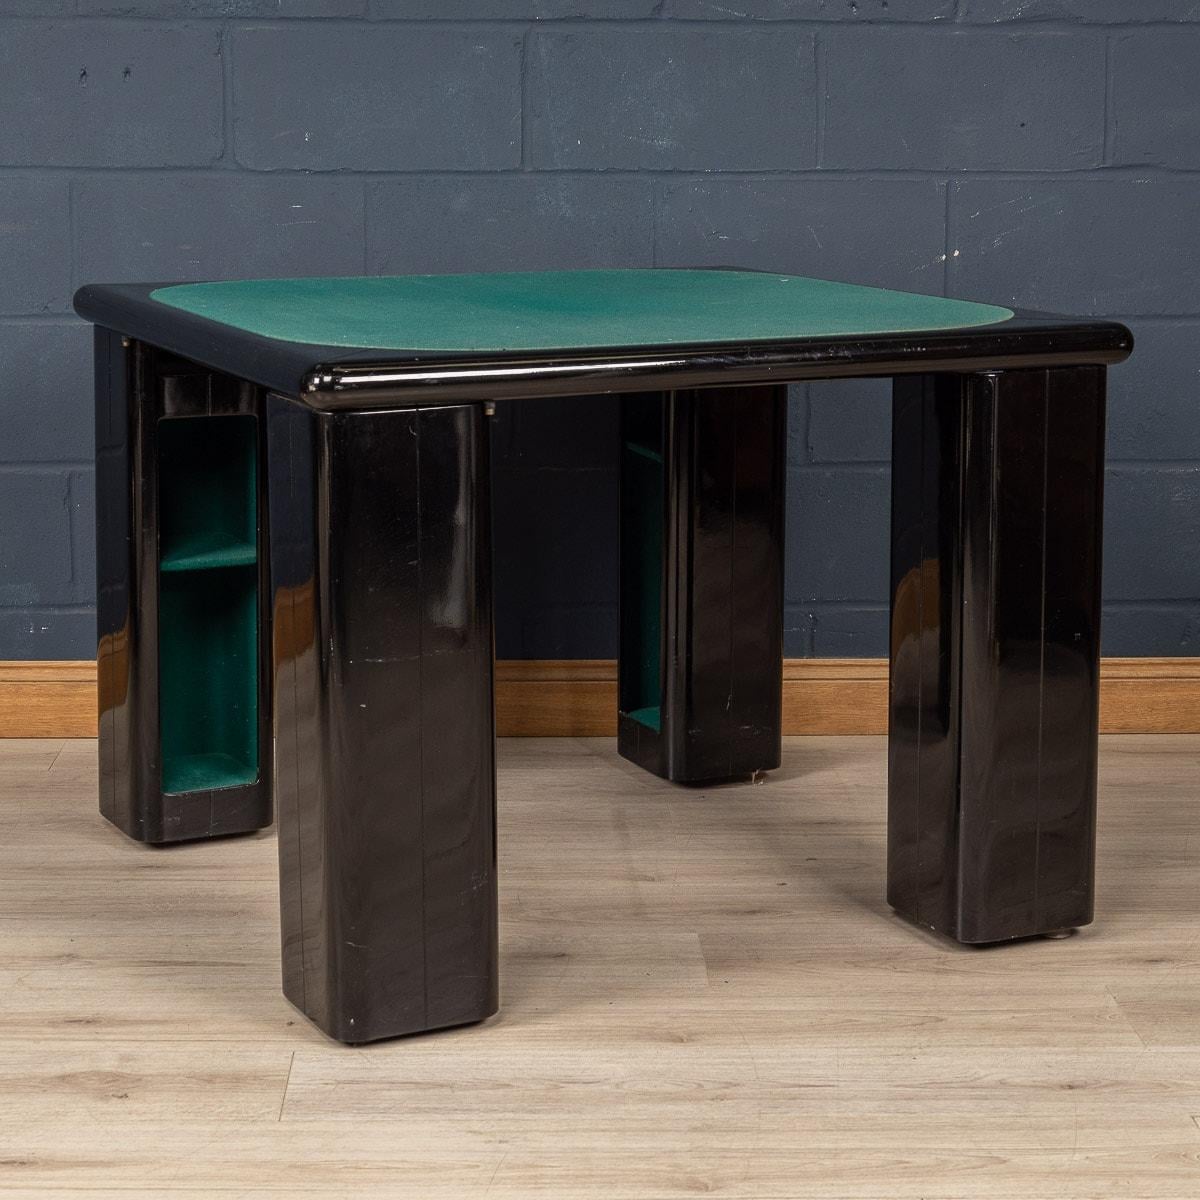 20th Century Lacquered Wood Games Table & Chairs by Pierluigi Molinari for Pozzi, Milan